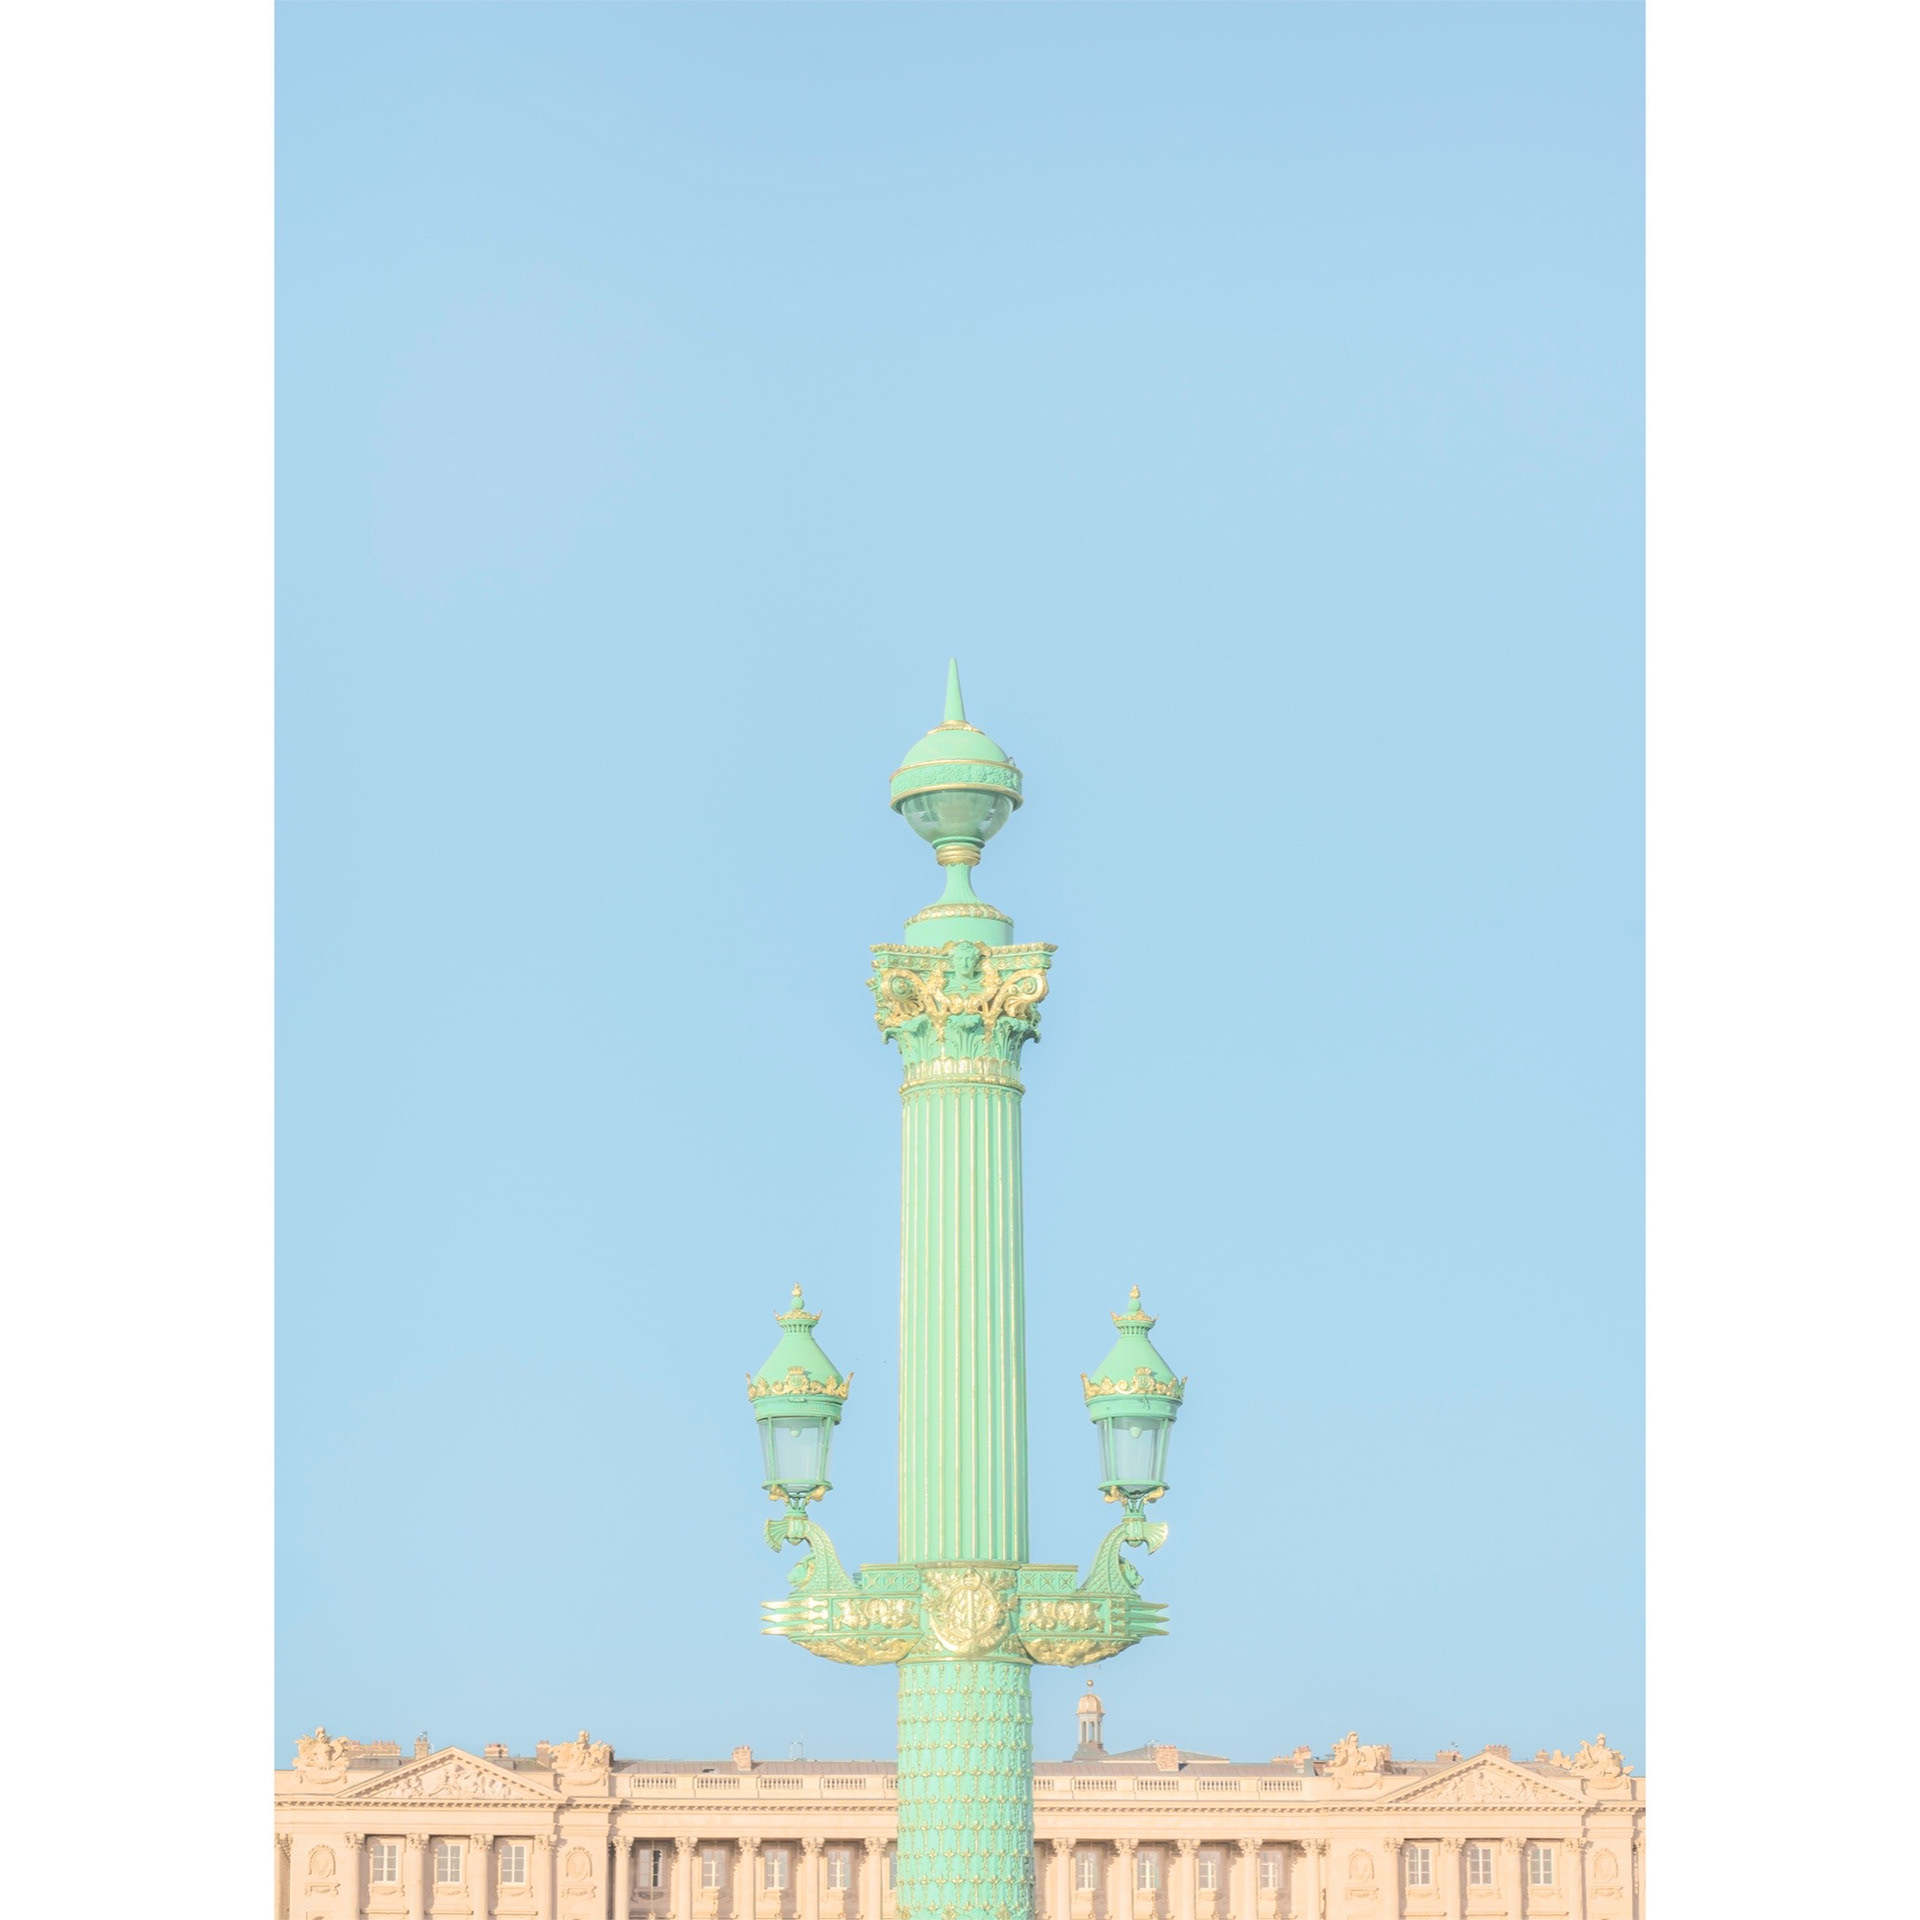 Photograph of an historic lantern in Paris with popping green colors and blue sky.Symmetric and minimalist composition with pastel aesthetic